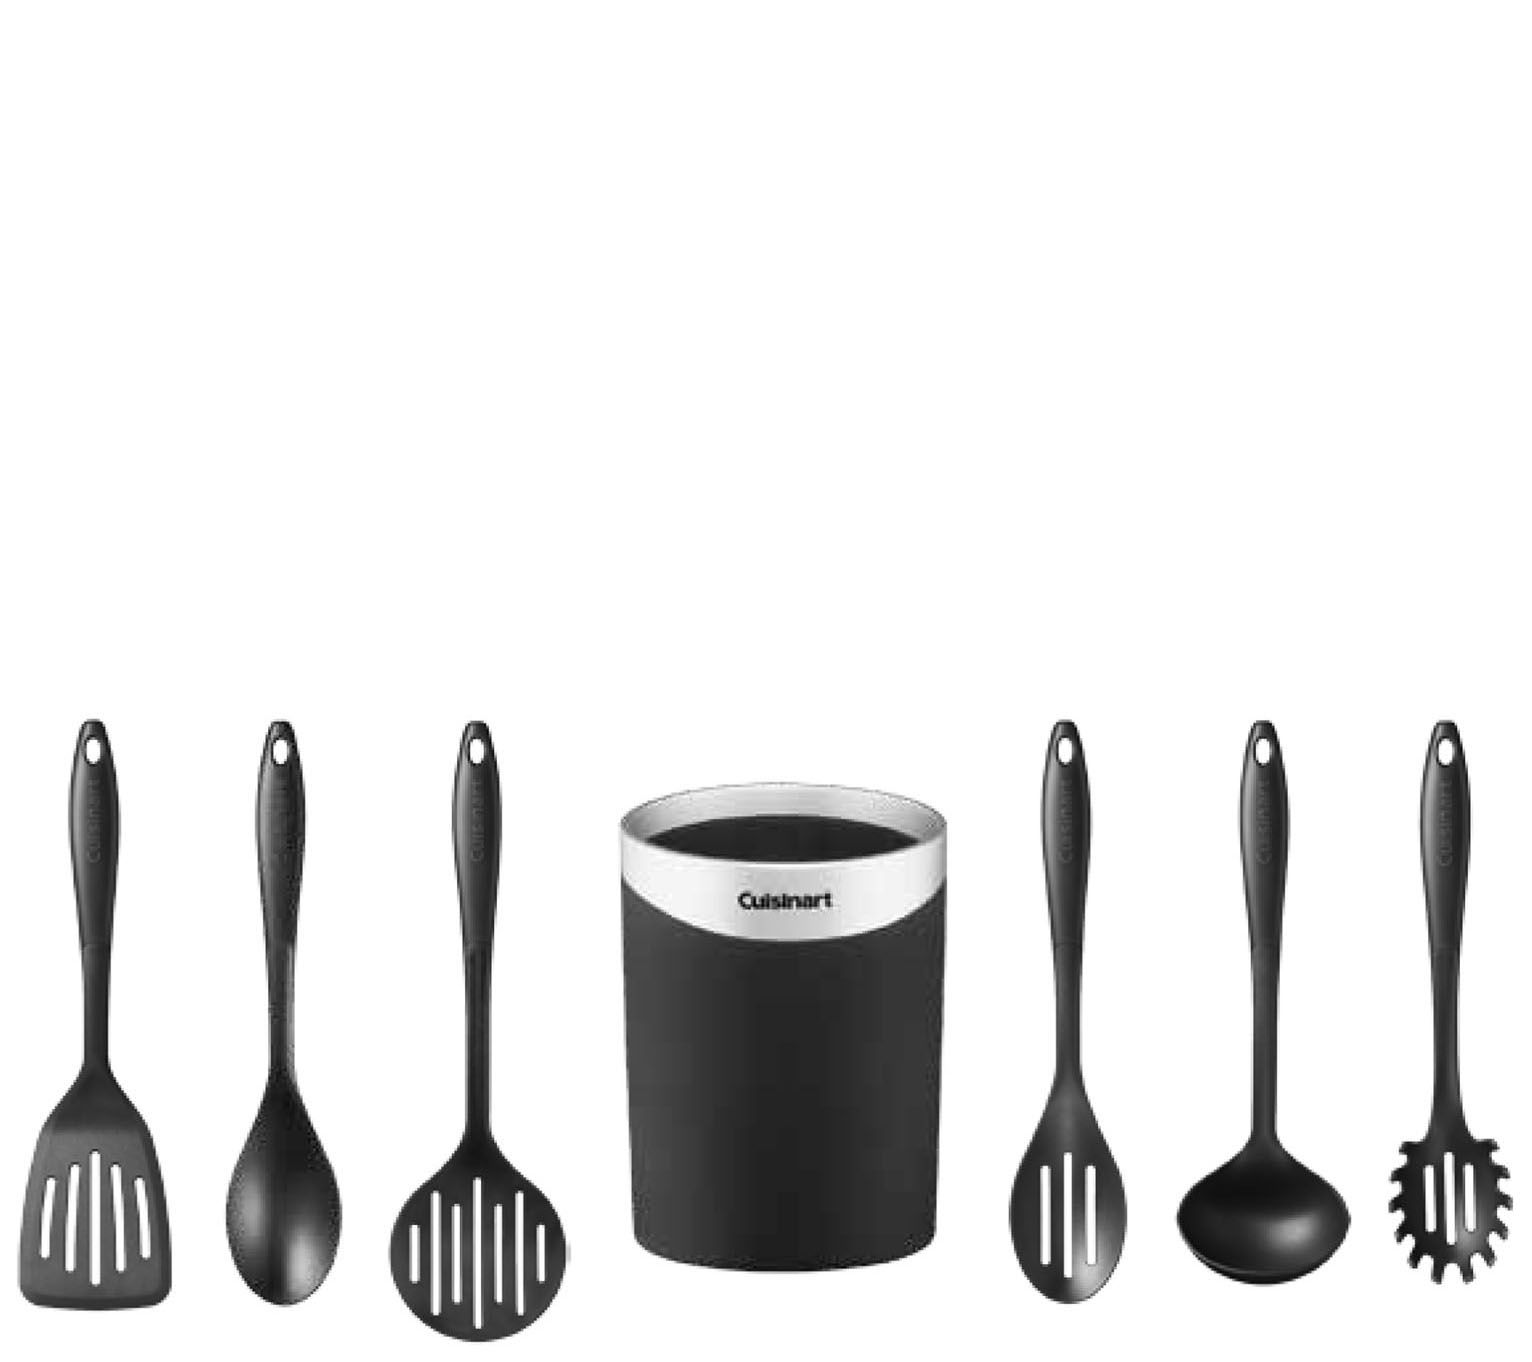 Cuisinart Crock with Set of 7 Curve Tools 